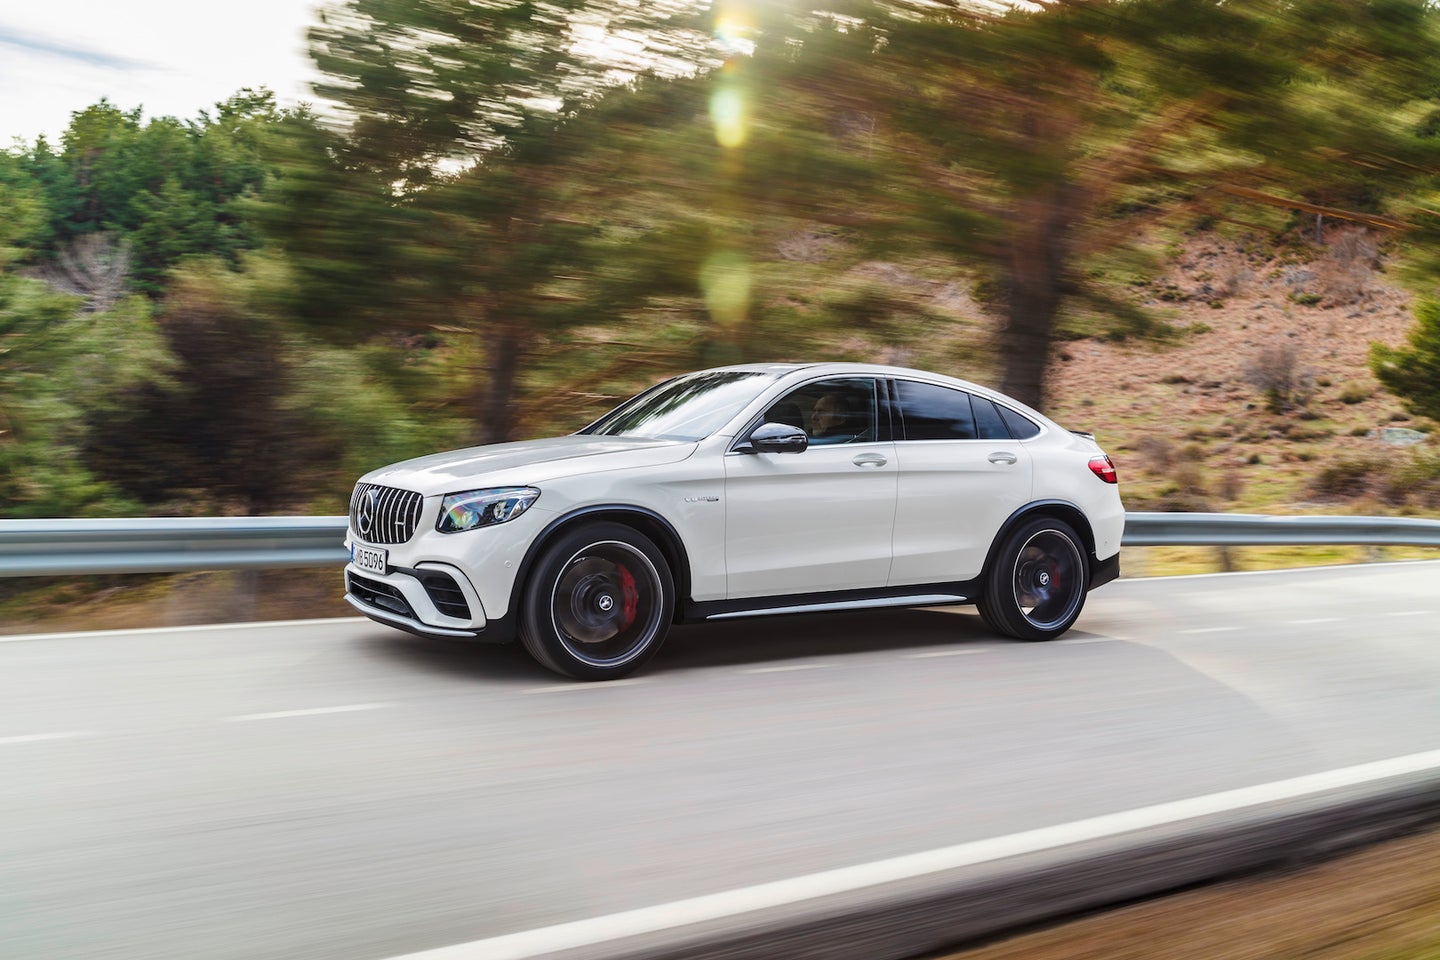 2018 Mercedes-AMG GLC63 S Coupe Review: AMG’s First High-Performance SUV Worth a Damn